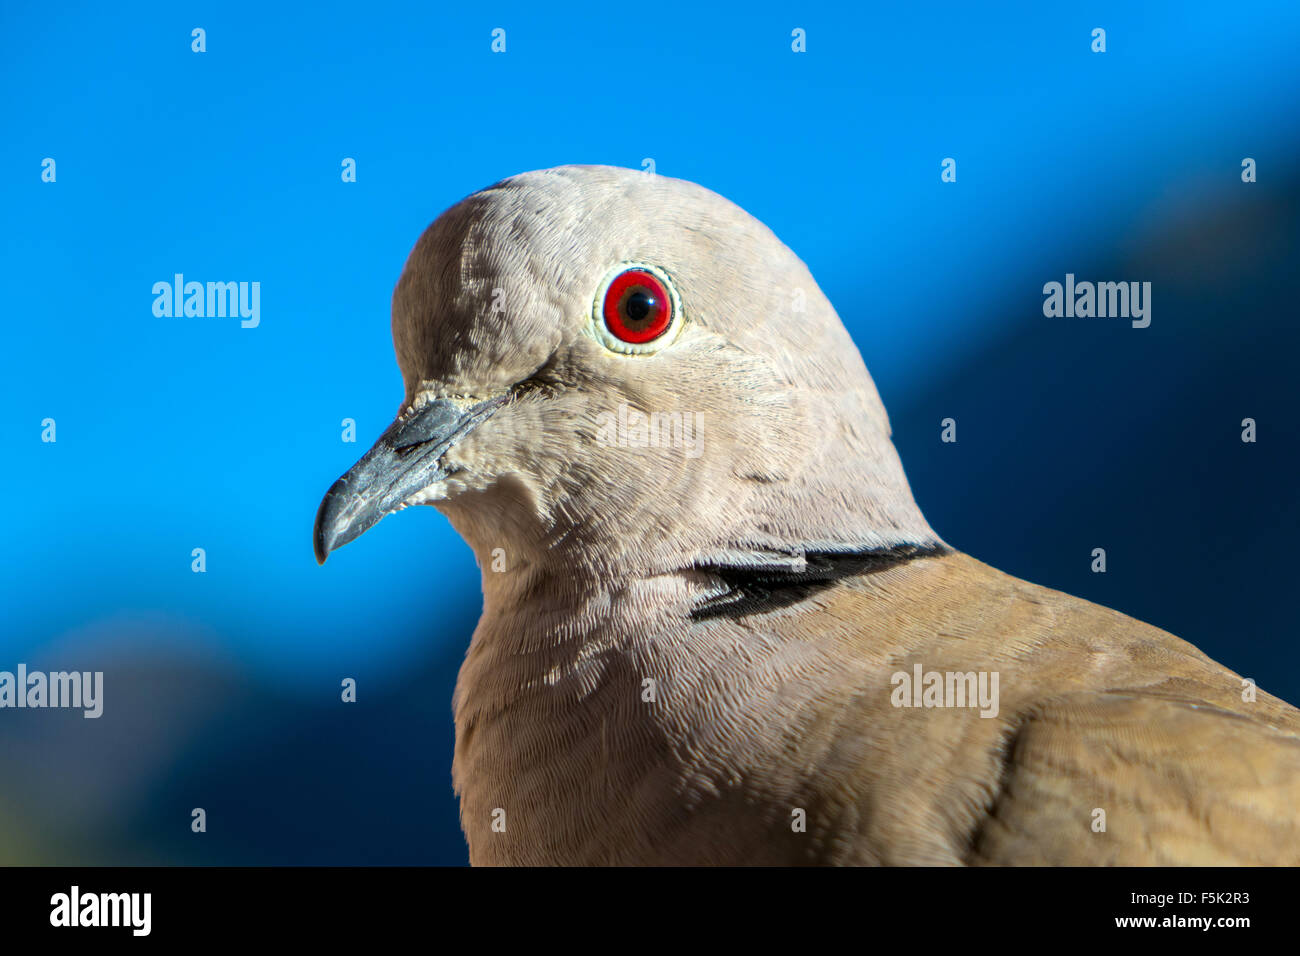 Close-up of Collared Dove with ruby red eye pigeon Stock Photo